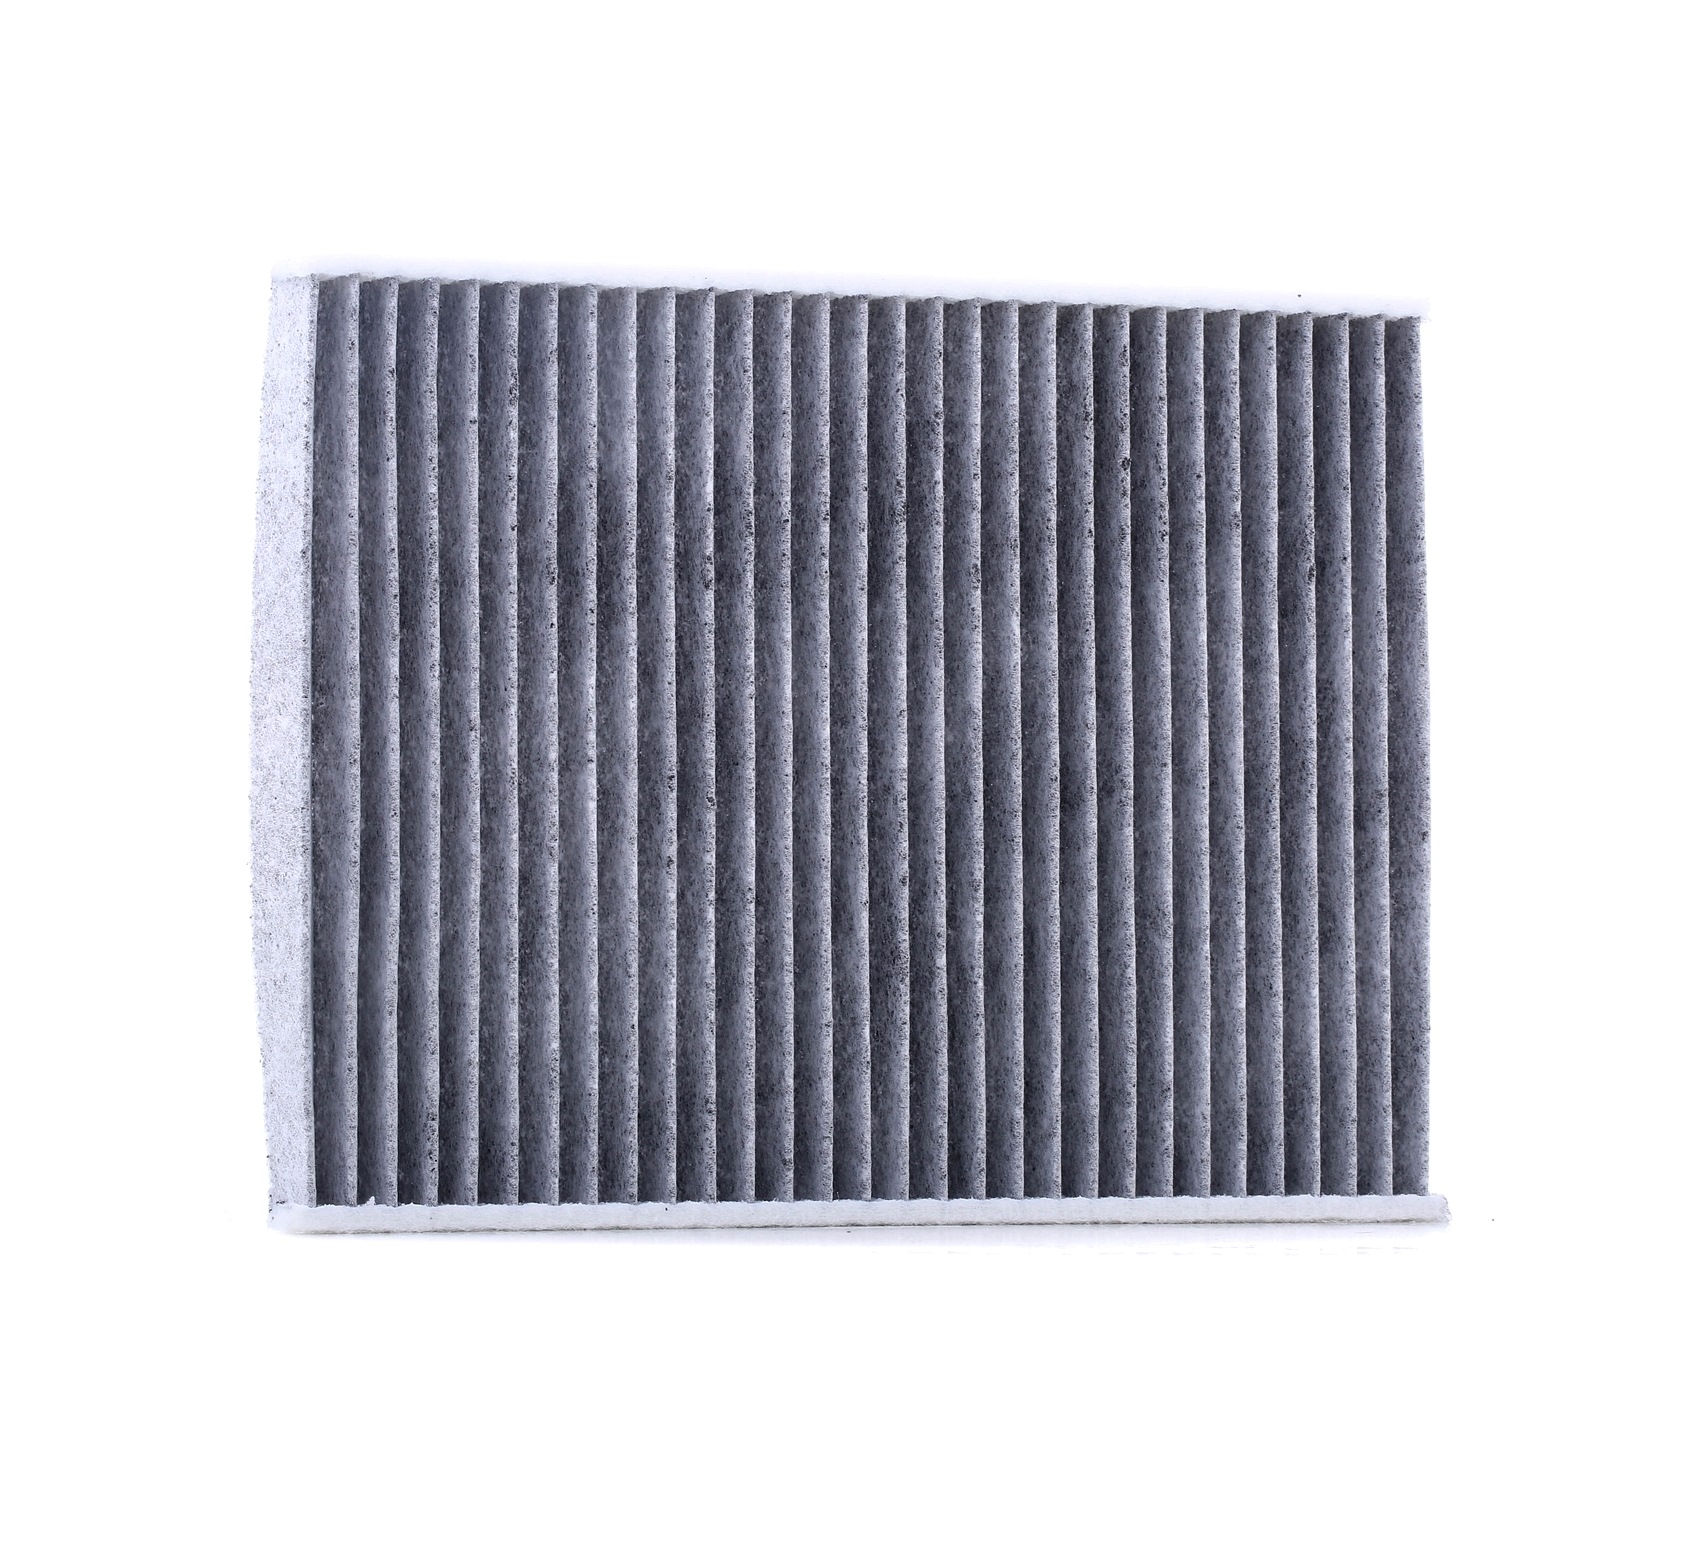 UFI 54.170.00 Pollen filter Activated Carbon Filter, 240 mm x 189 mm x 22 mm